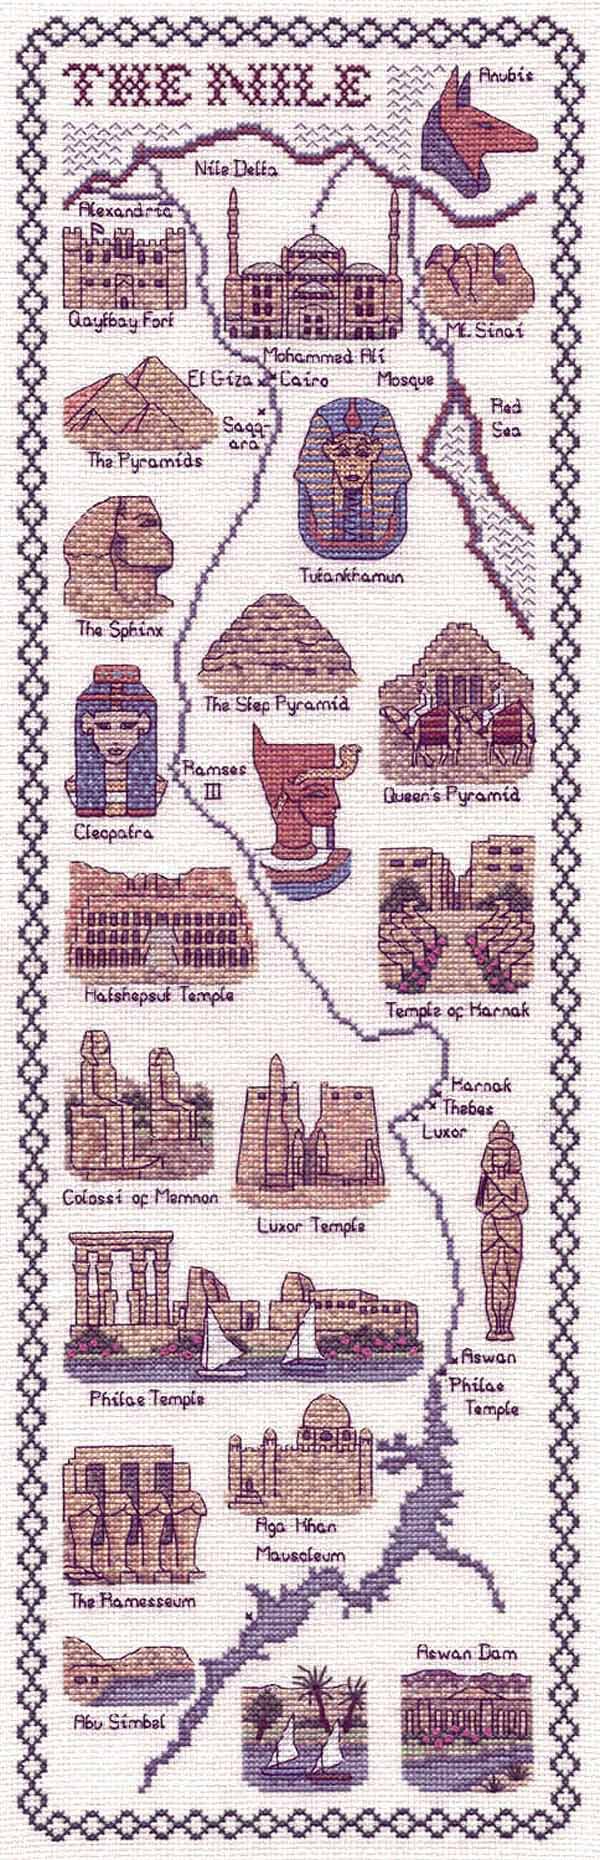 The Nile Map Cross Stitch Kit by Classic Embroidery